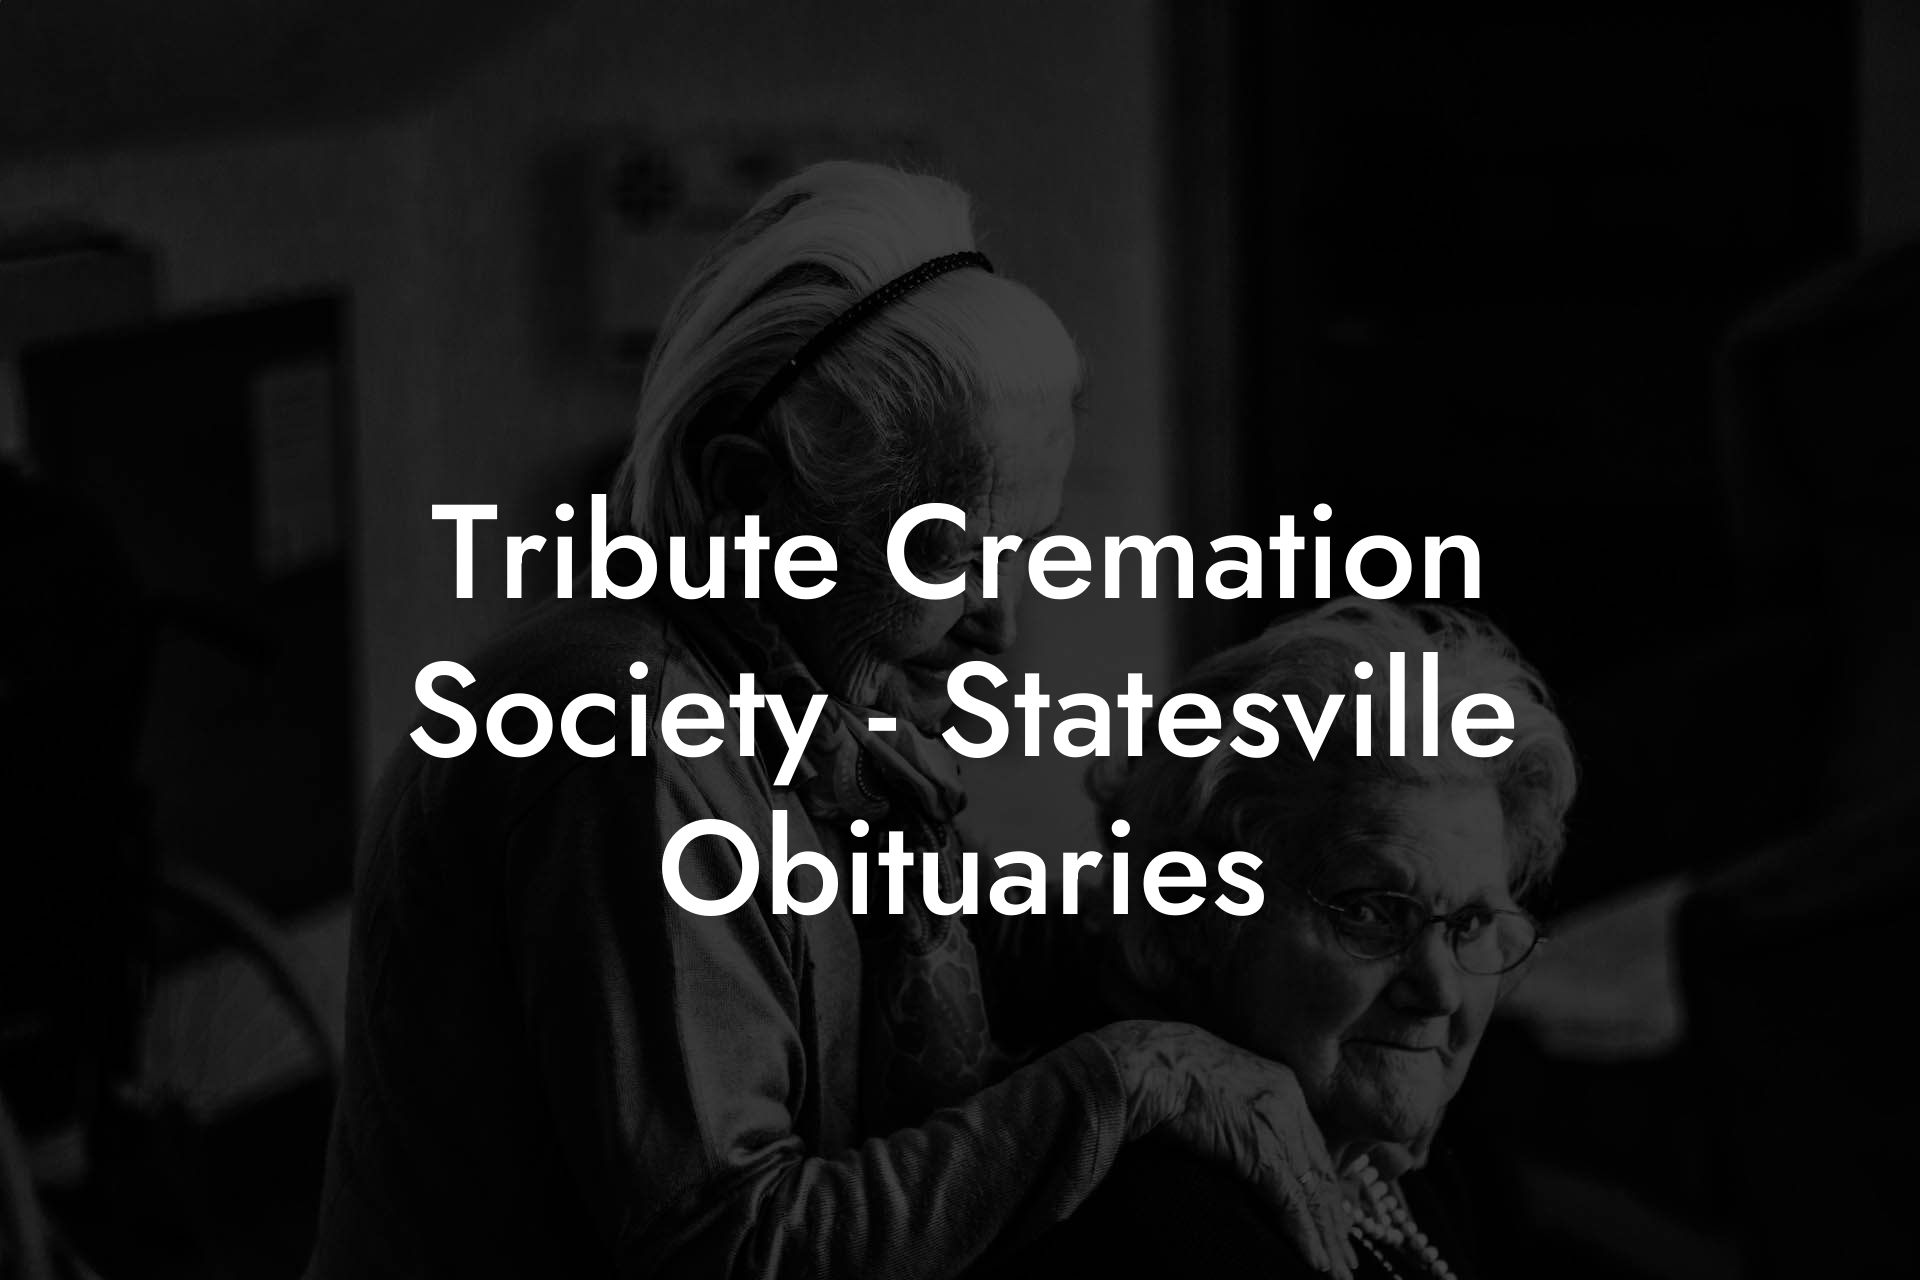 Tribute Cremation Society - Statesville Obituaries